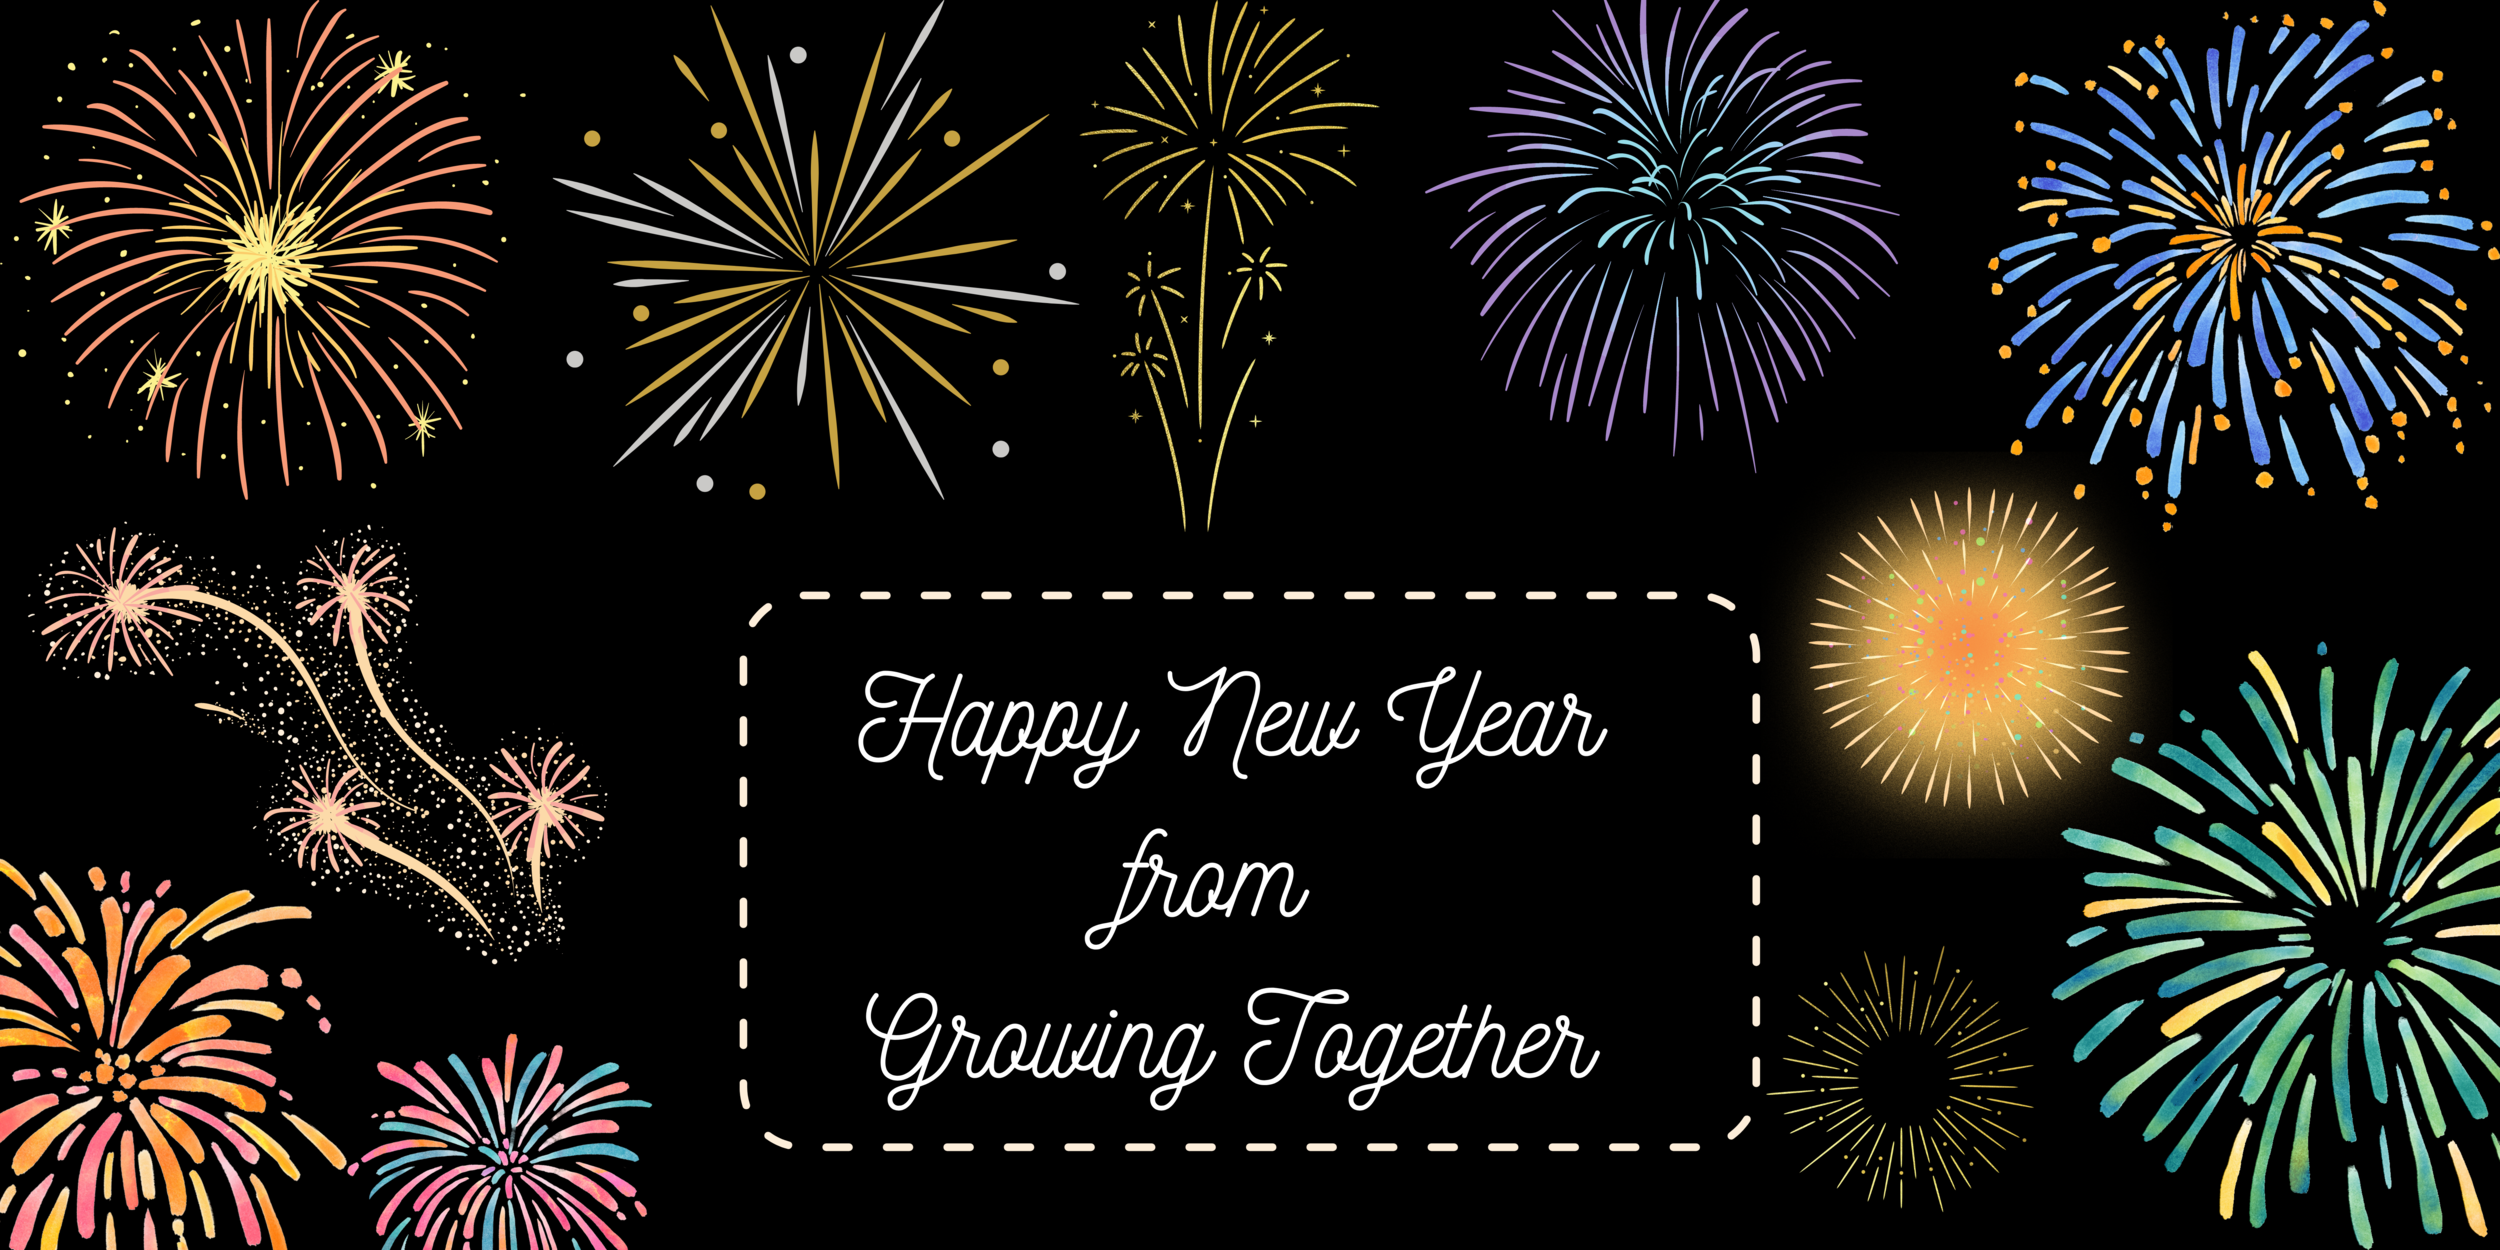 Happy New Year from Growing Together.png